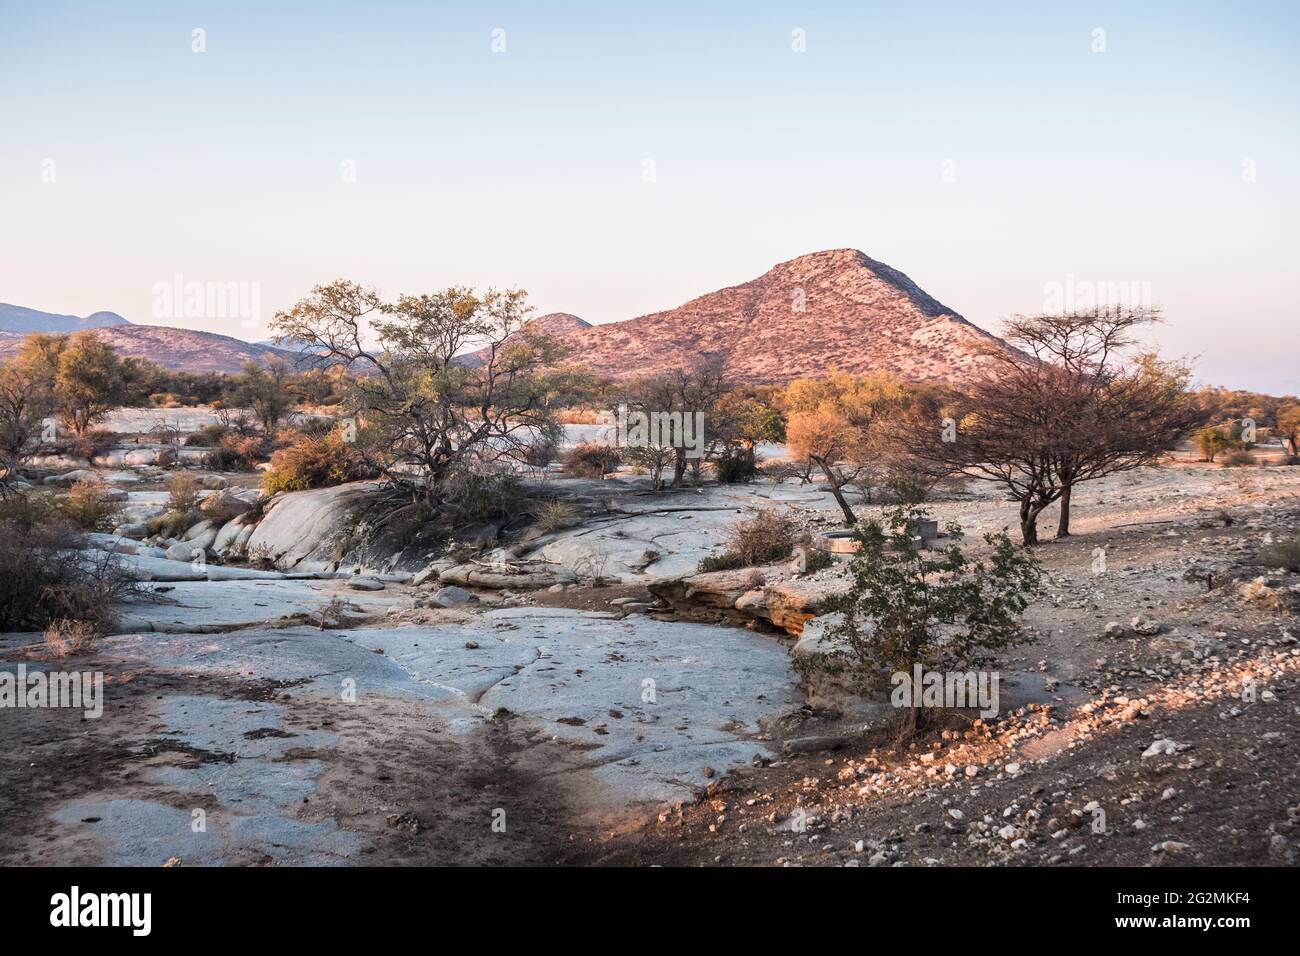 Etendero Mountain and Dry Riverbed in the Savanna of the Erongo Region in Namibia, Africa Stock Photo